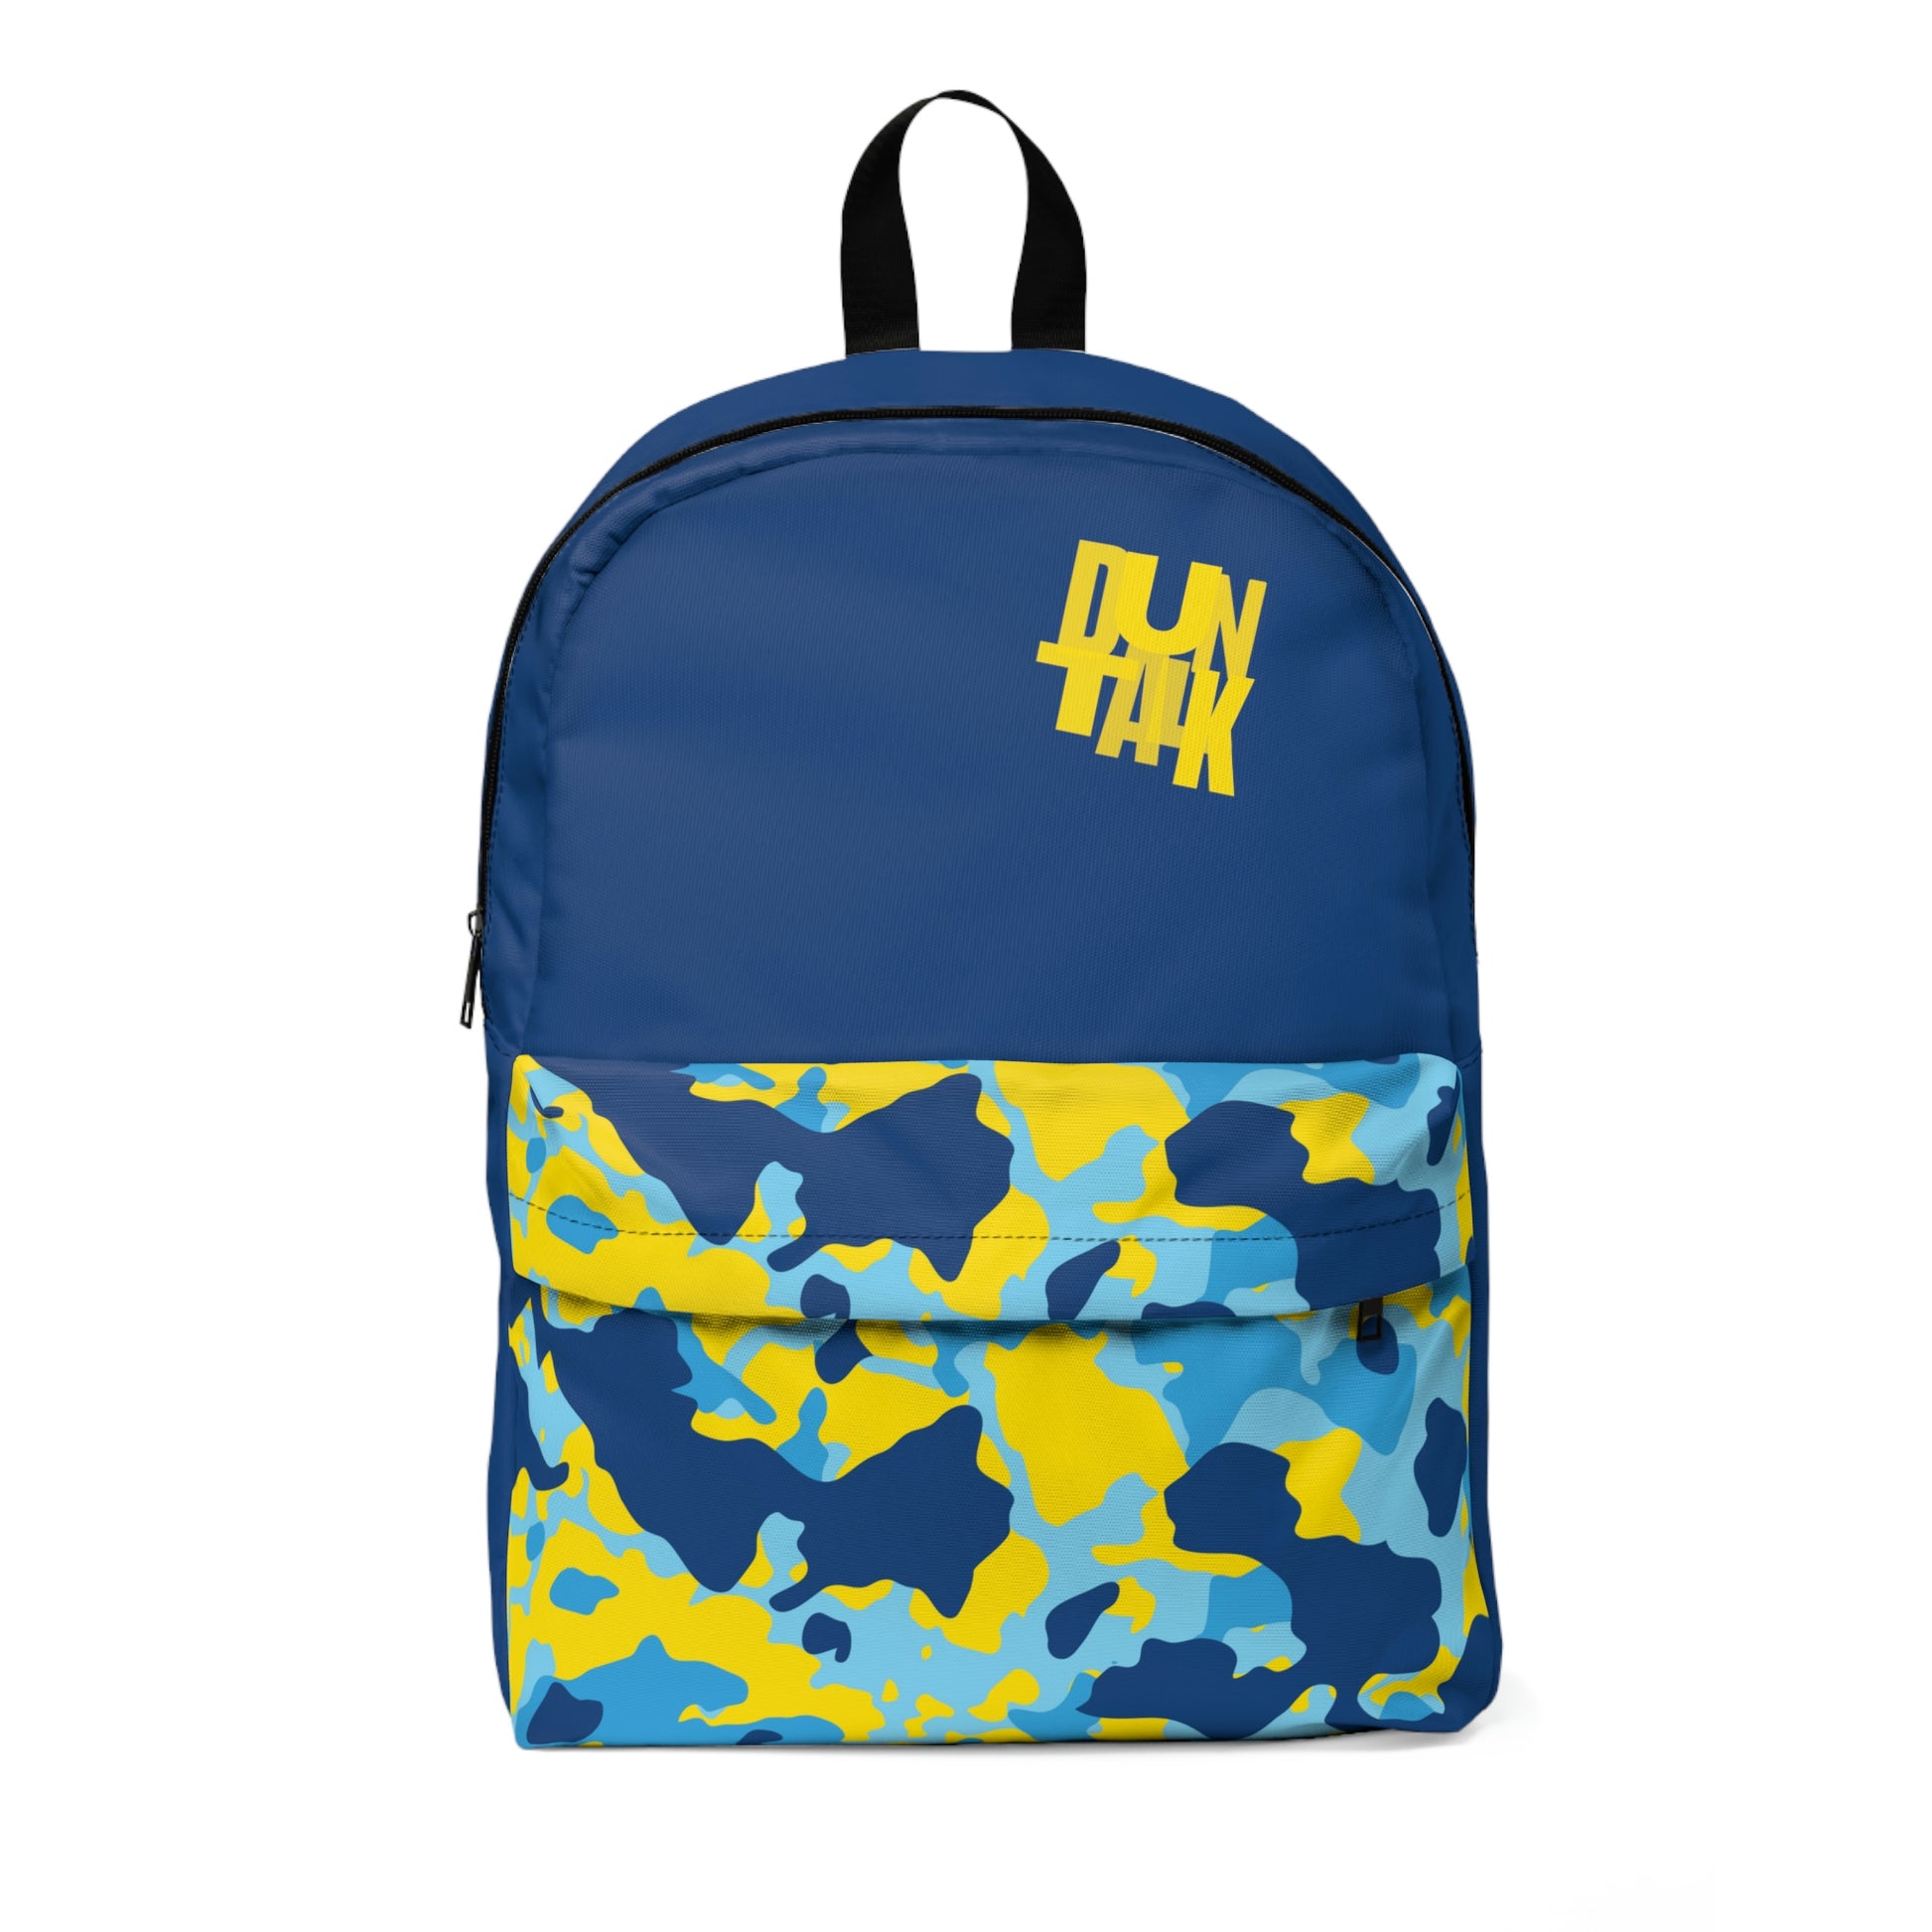 Dark blue backpack with "Duntalk" print written in yellow on the large pocket. Camouflage in yellow, dark blue, blue and light blue on the smaller pocket.